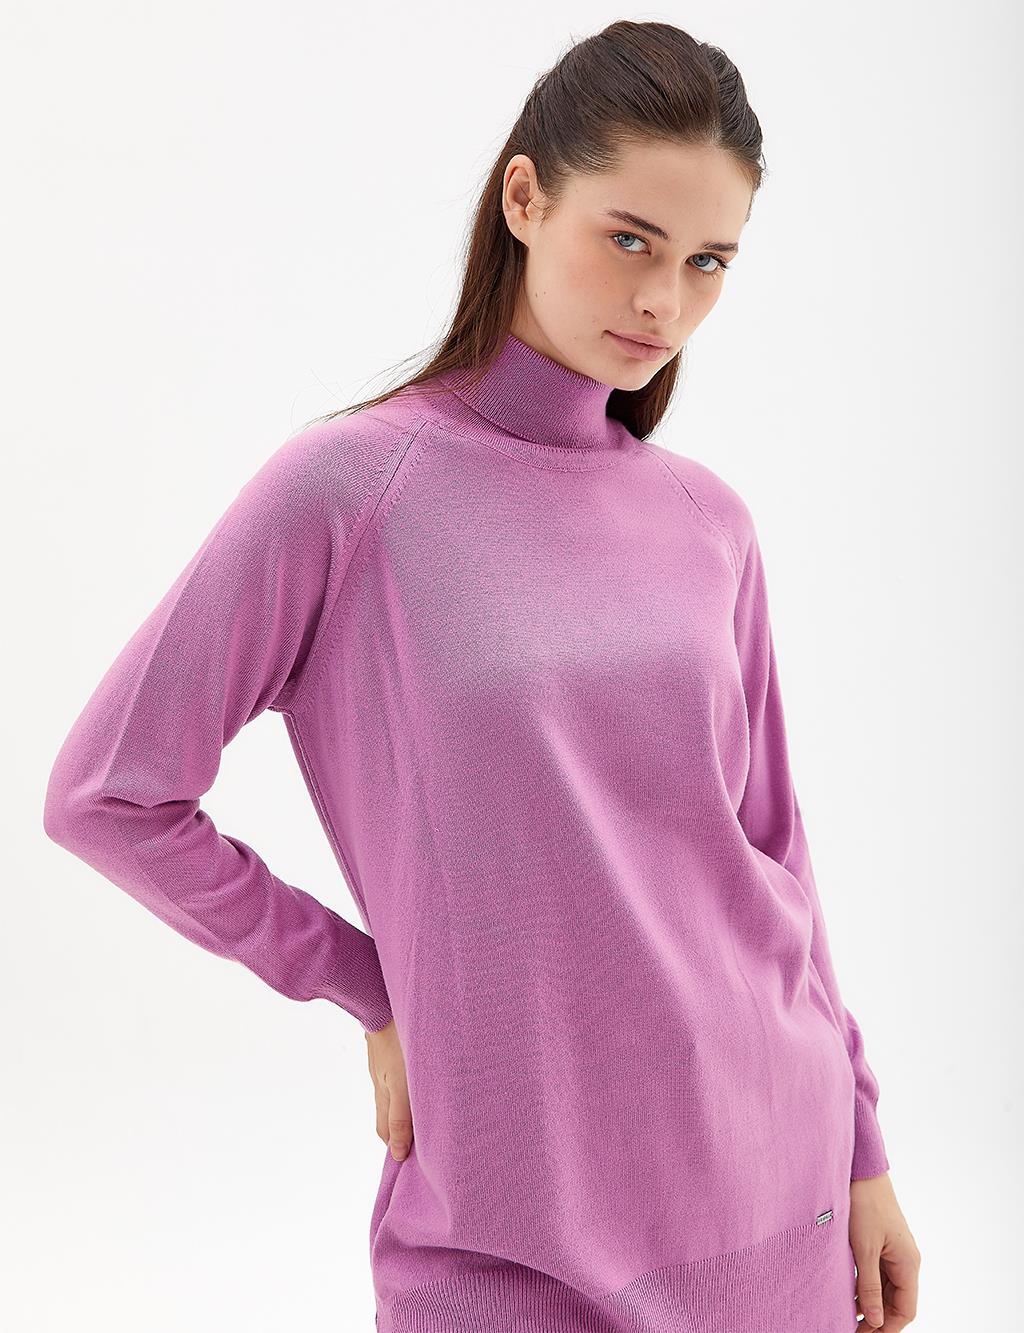 Fisherman's Neck Knit Blouse in Lilac